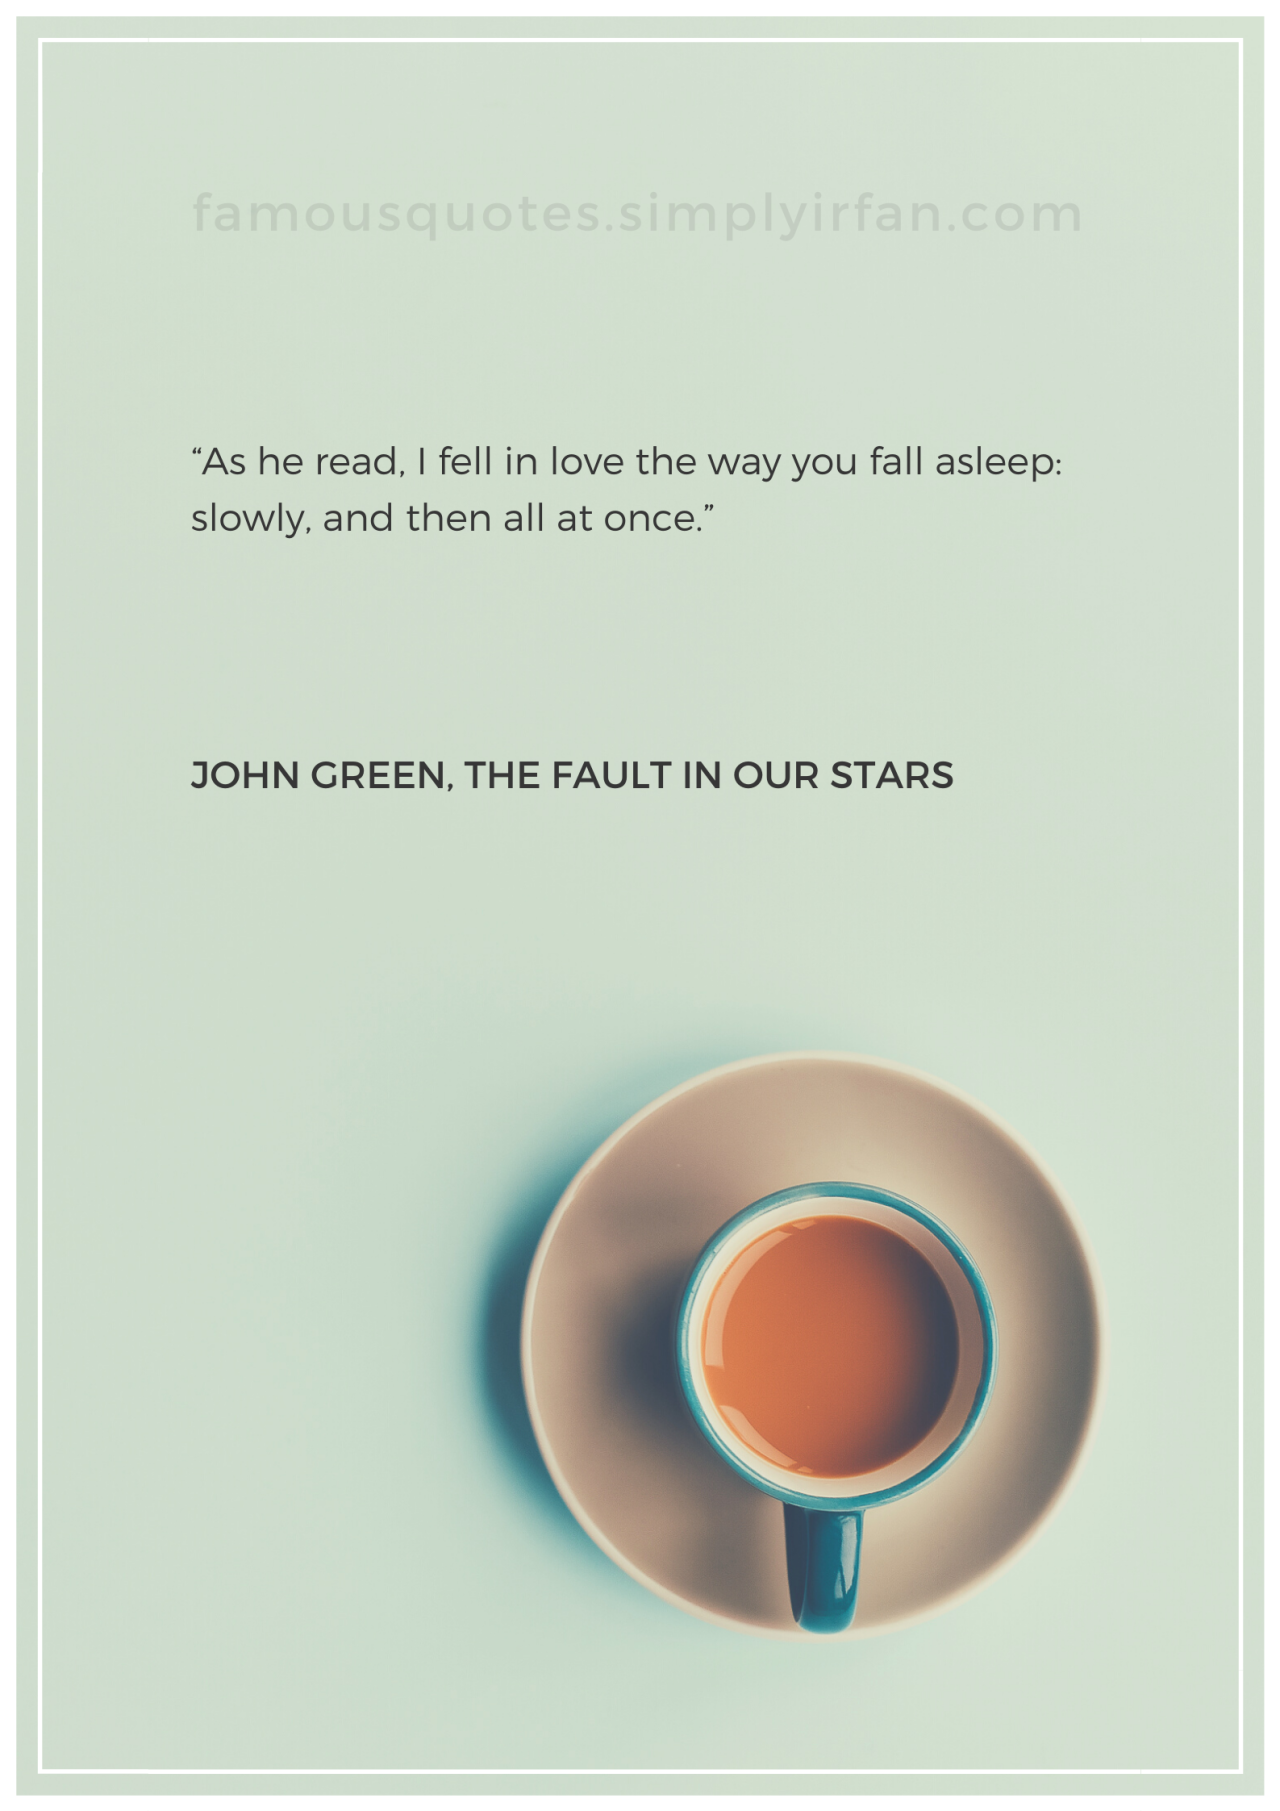 Love Quote: "As he read, I fell in love the way you fall asleep: slowly, and then all at once." by John Green, The Fault in Our Stars